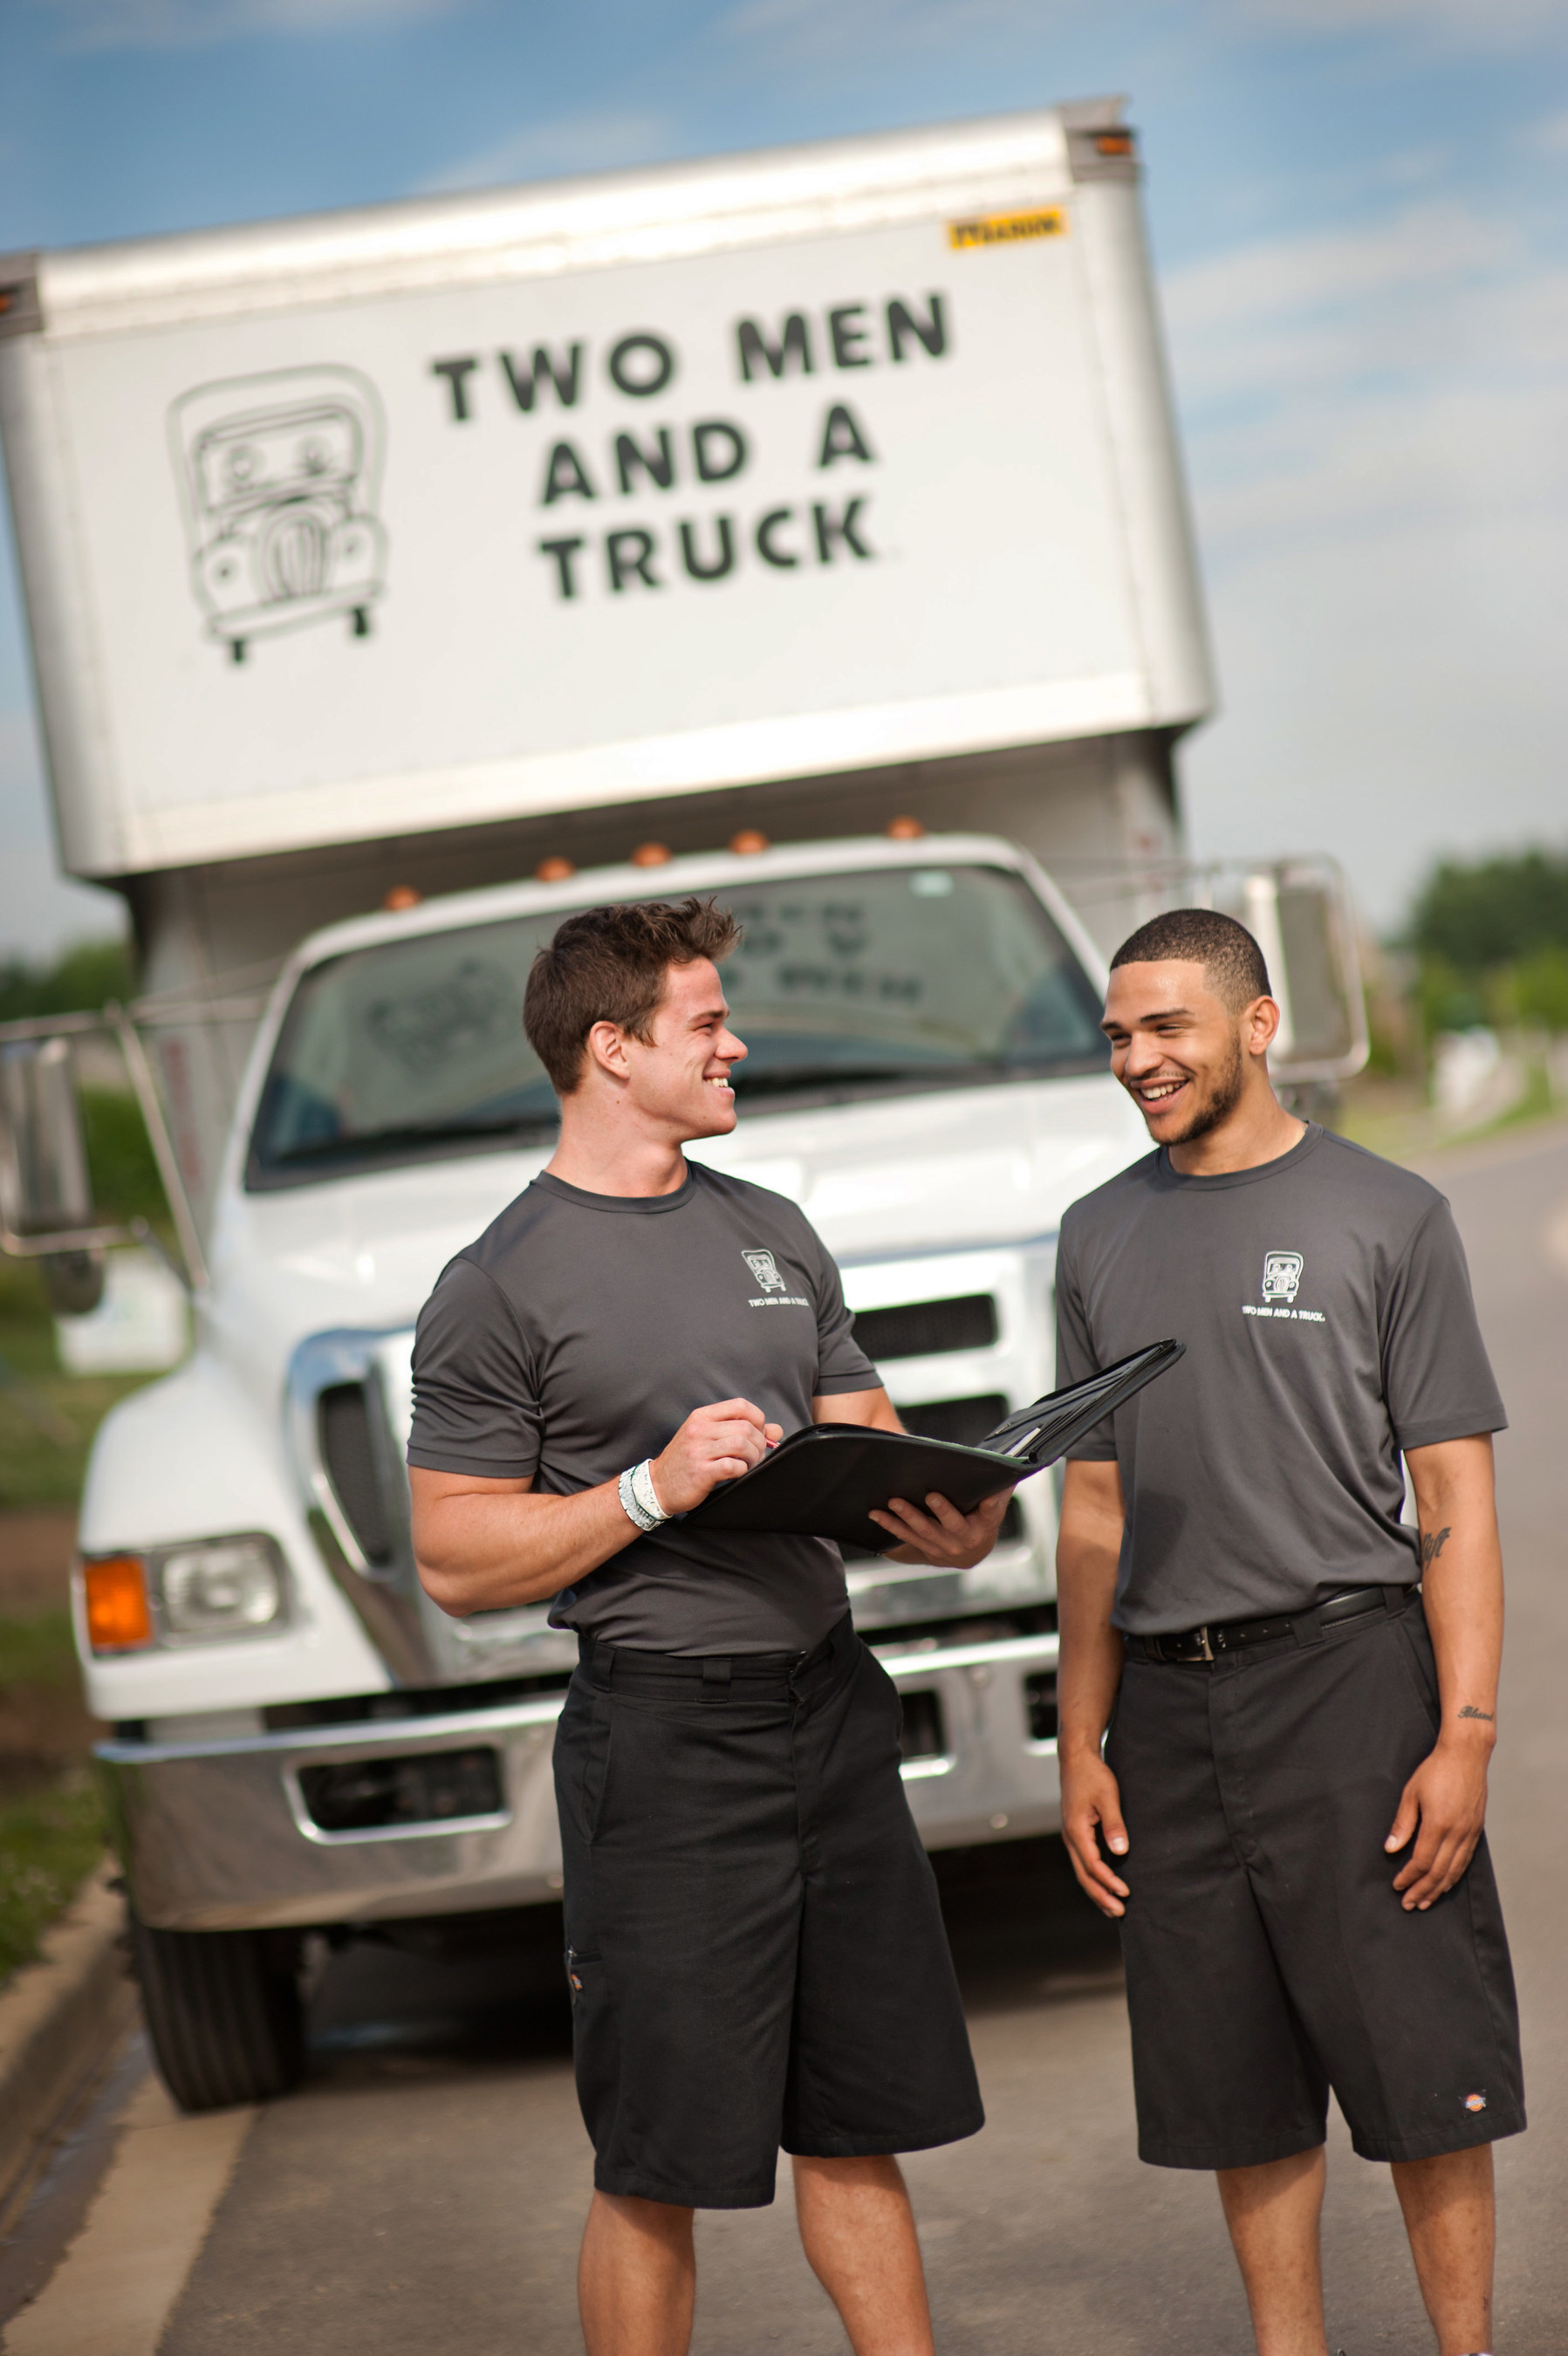 TWO MEN AND A TRUCK(R) is the fastest-growing franchised moving company in the country and offers comprehensive home and business relocation and packing services. Our goal is to exceed customers expectations by customizing our moving services to specific needs.